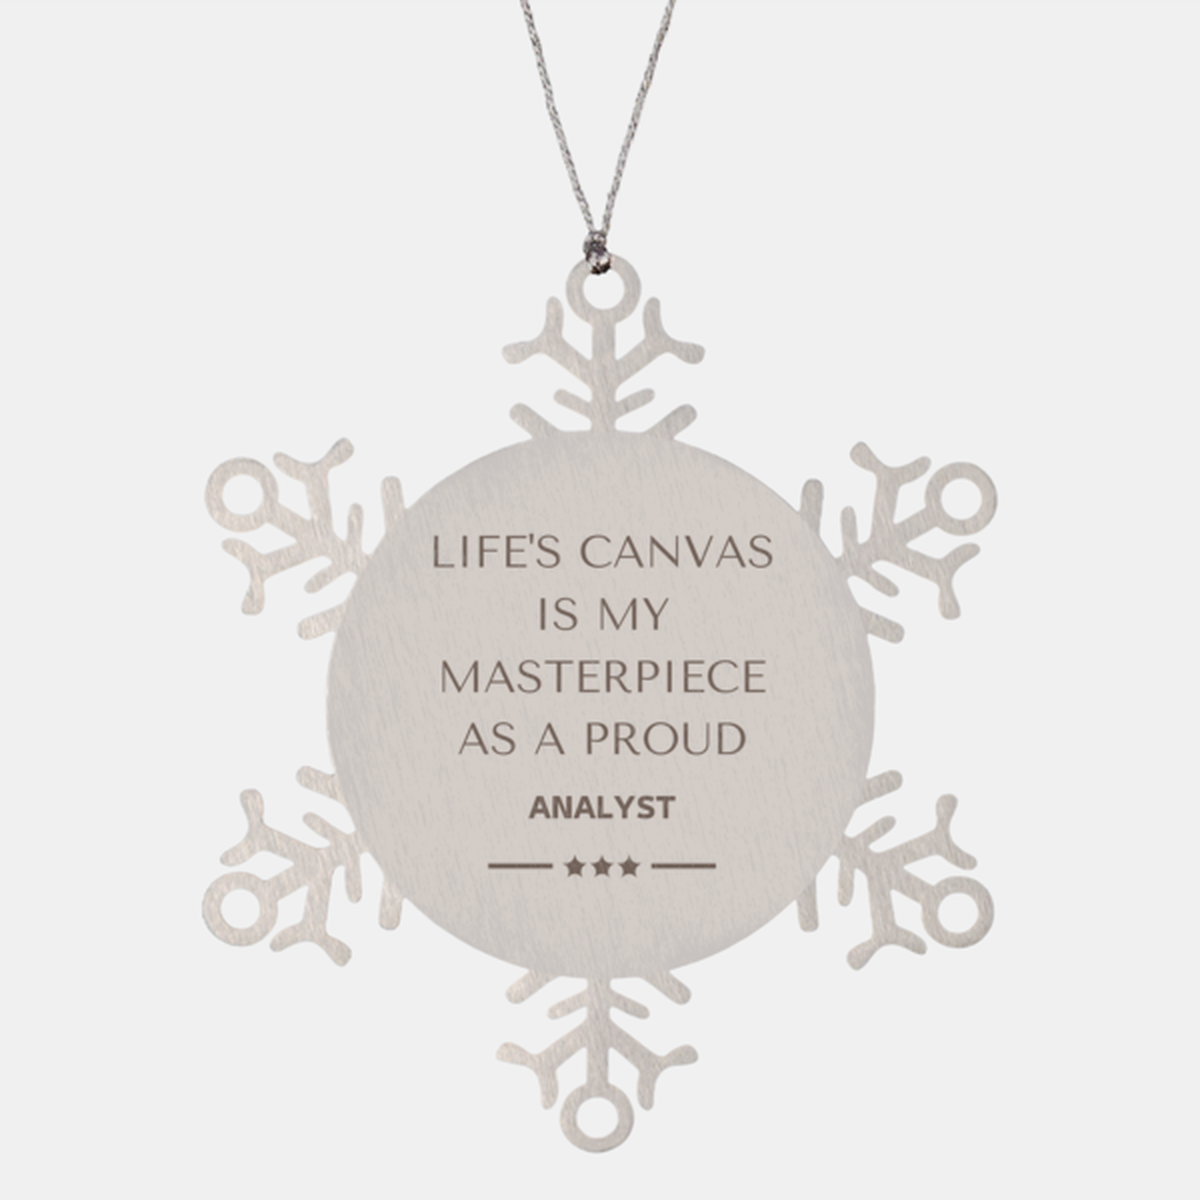 Proud Analyst Gifts, Life's canvas is my masterpiece, Epic Birthday Christmas Unique Snowflake Ornament For Analyst, Coworkers, Men, Women, Friends